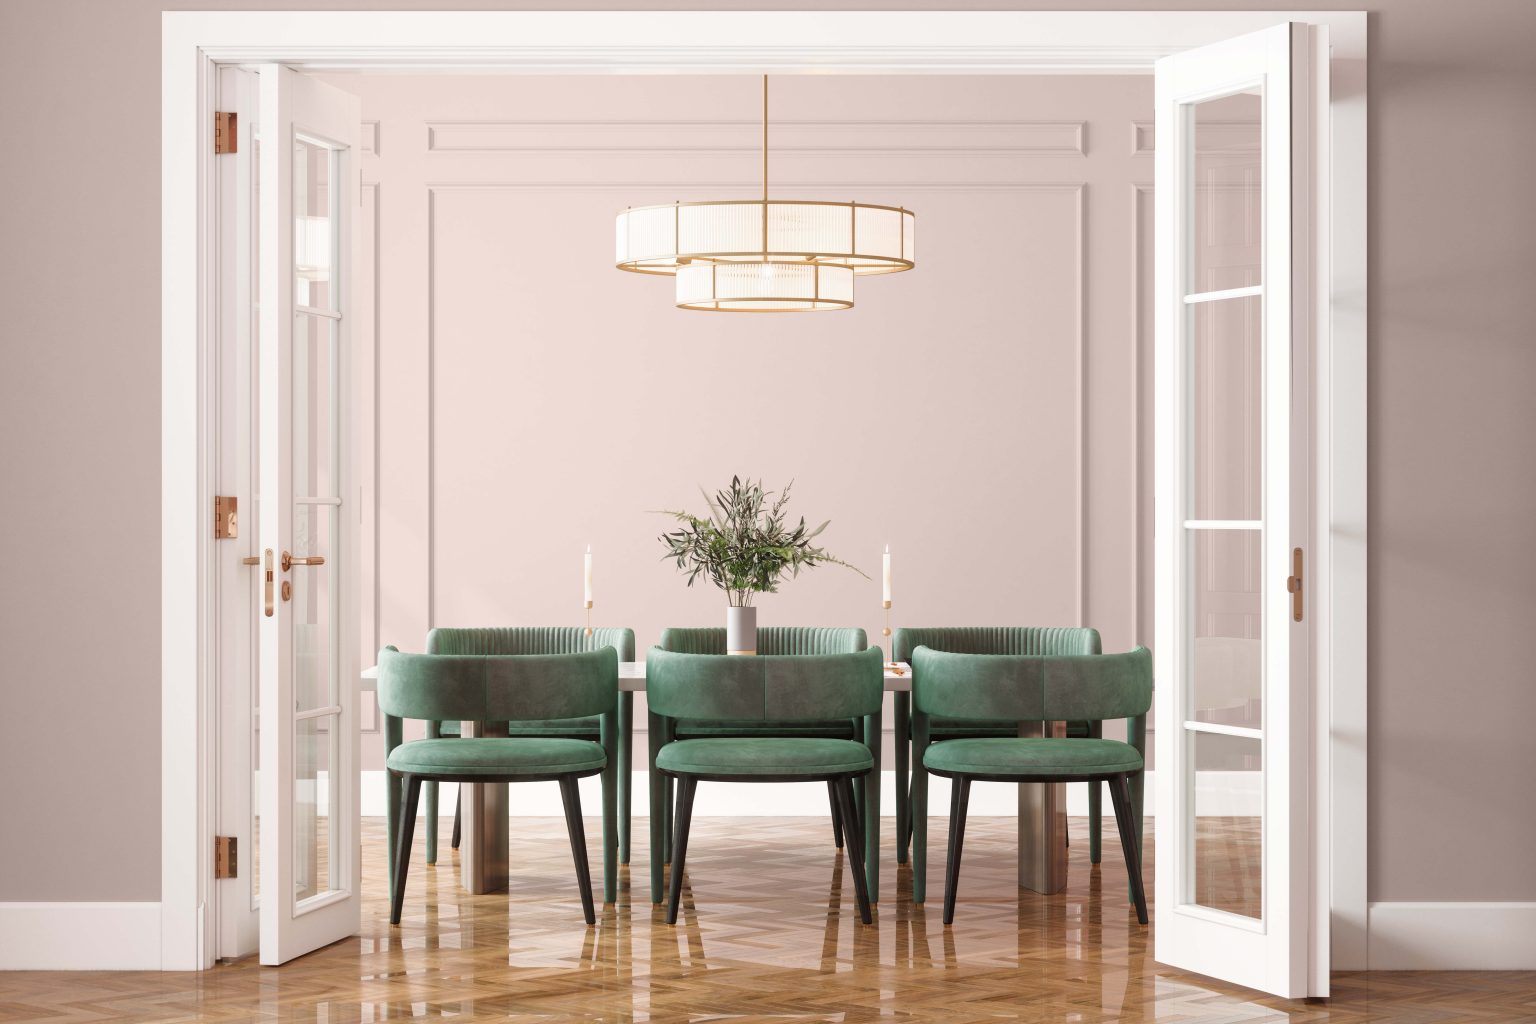 The entrance of an elegant dining room, with walls painted in a neutral light pink colour and styled with a white dining table and green velvet dining chairs